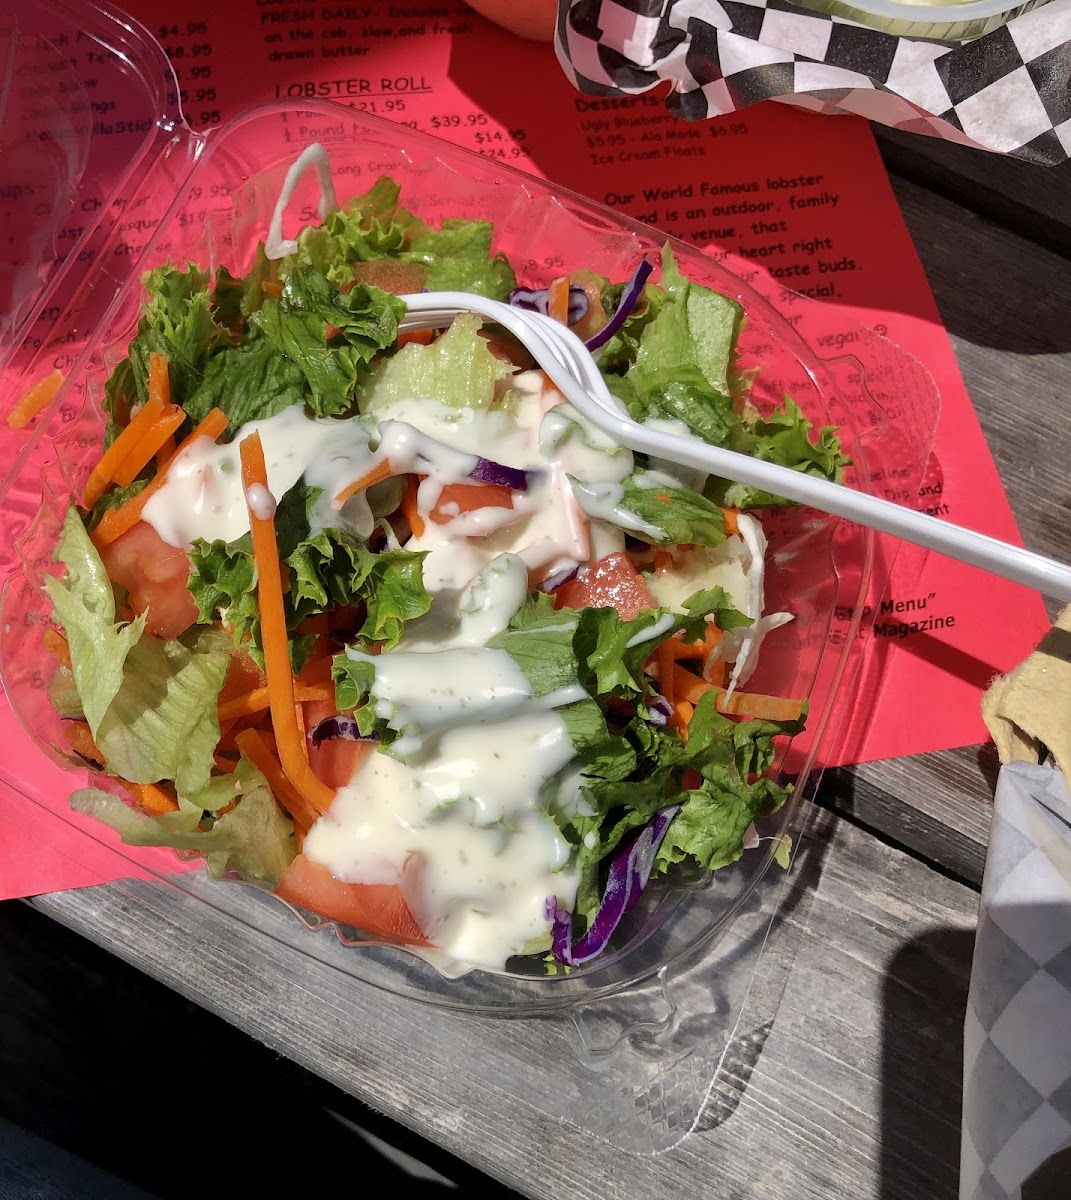 Side salad - had nice lettuce, carrot pieces, cabbage and tomatoes with side of dressing